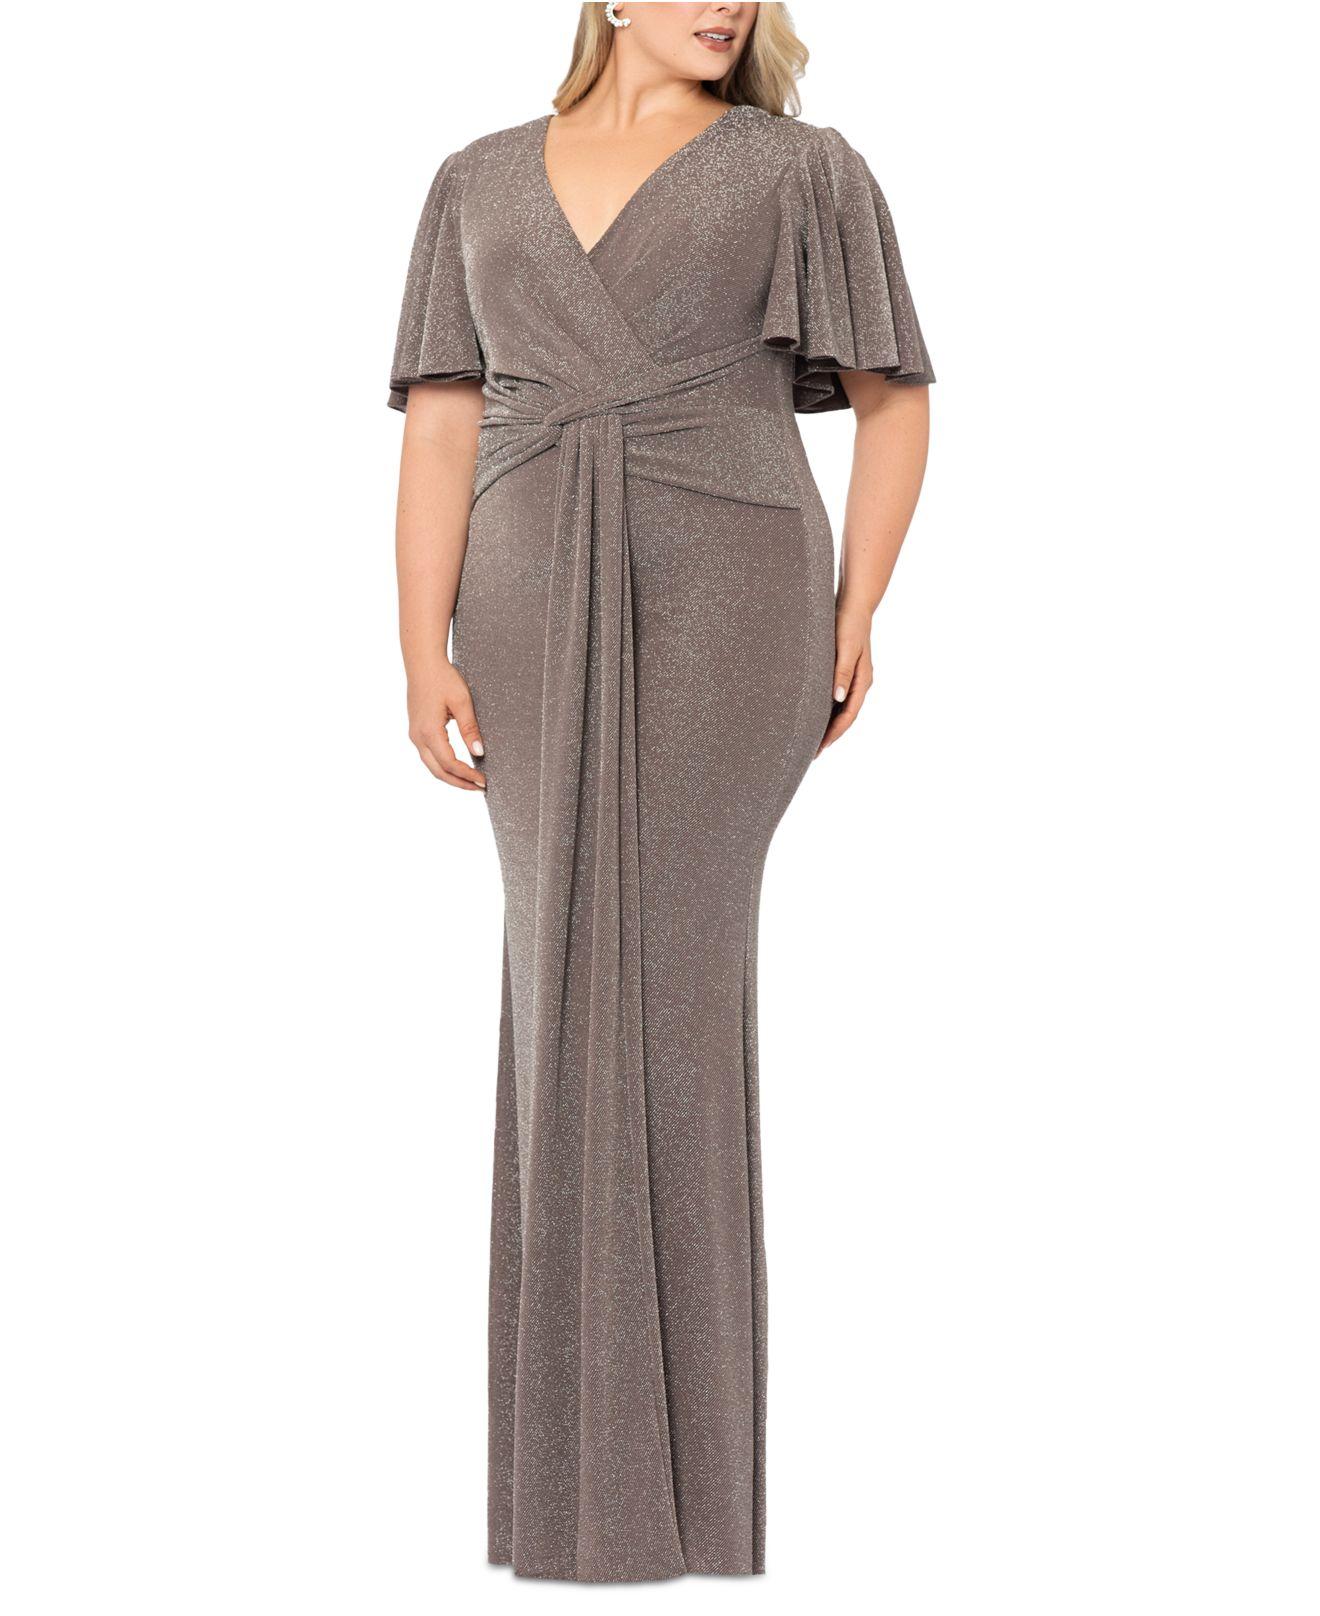 Betsy & Adam Plus Size V-neck Twist-front Glitter Gown in Brown | Lyst